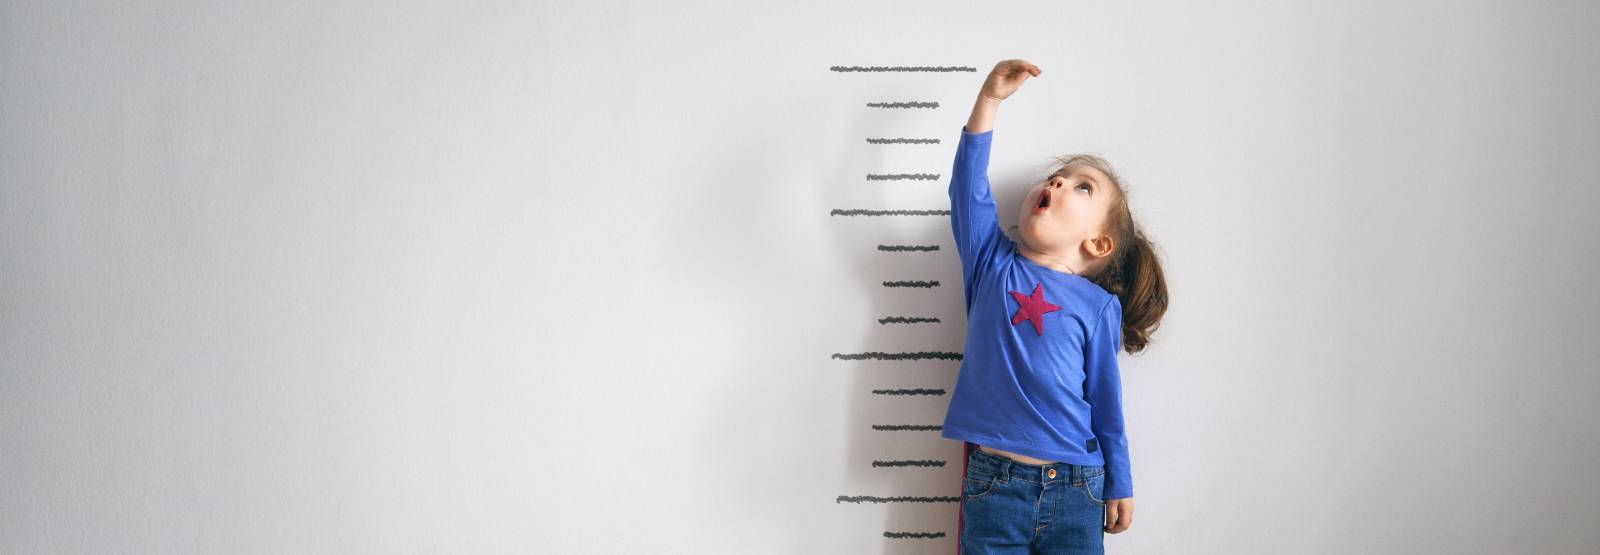 Young girl measuring herself on a growth chart on the wall.